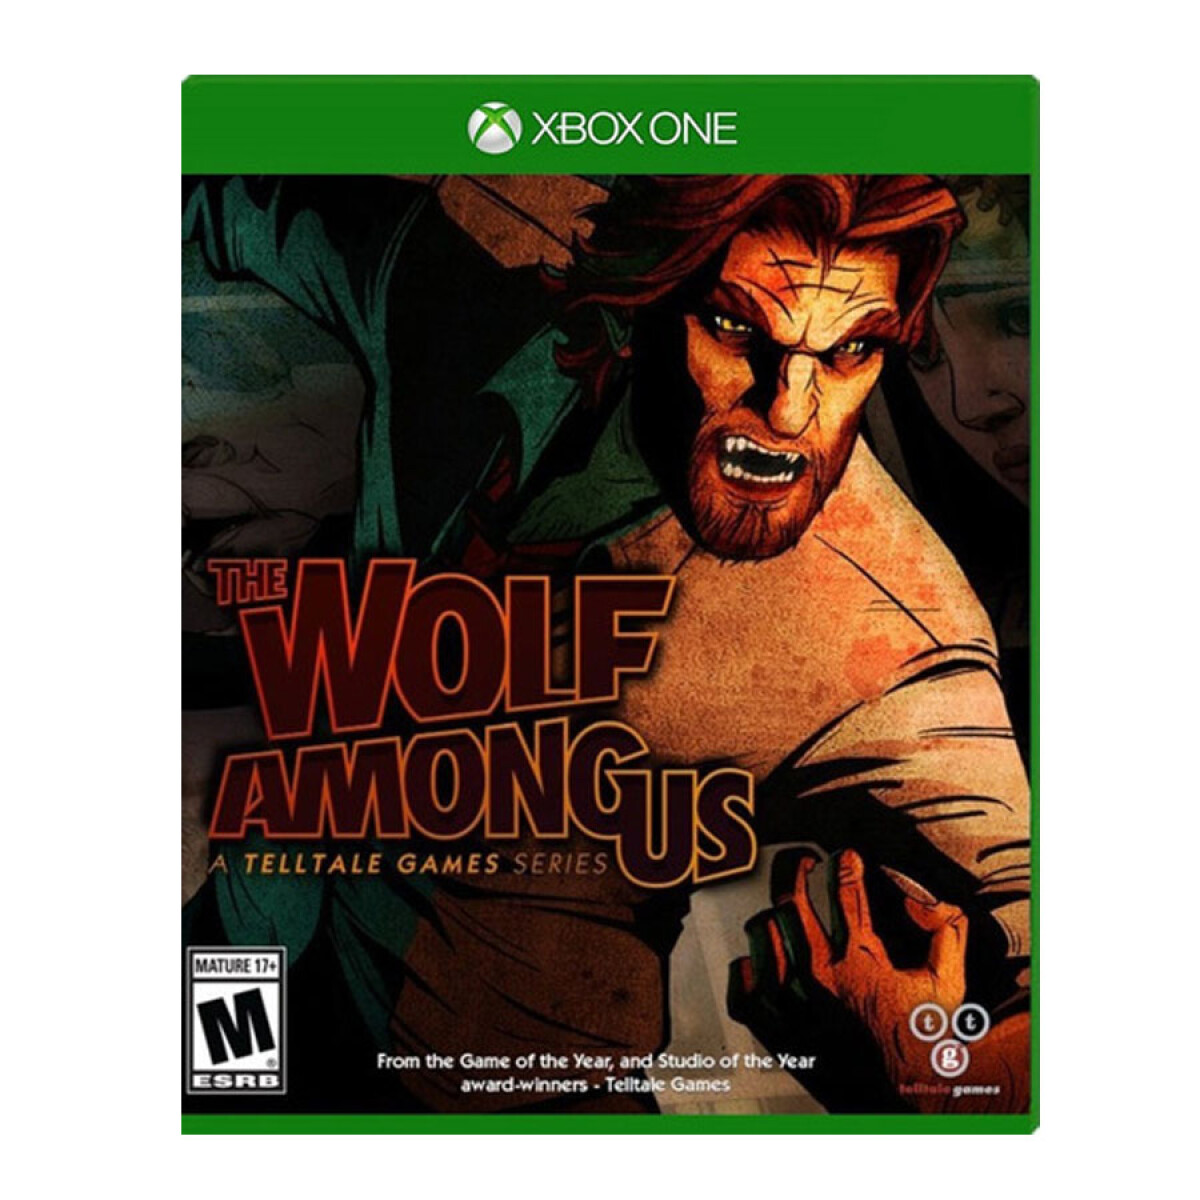 The Wolf Among Us (A Telltale Games Series) 